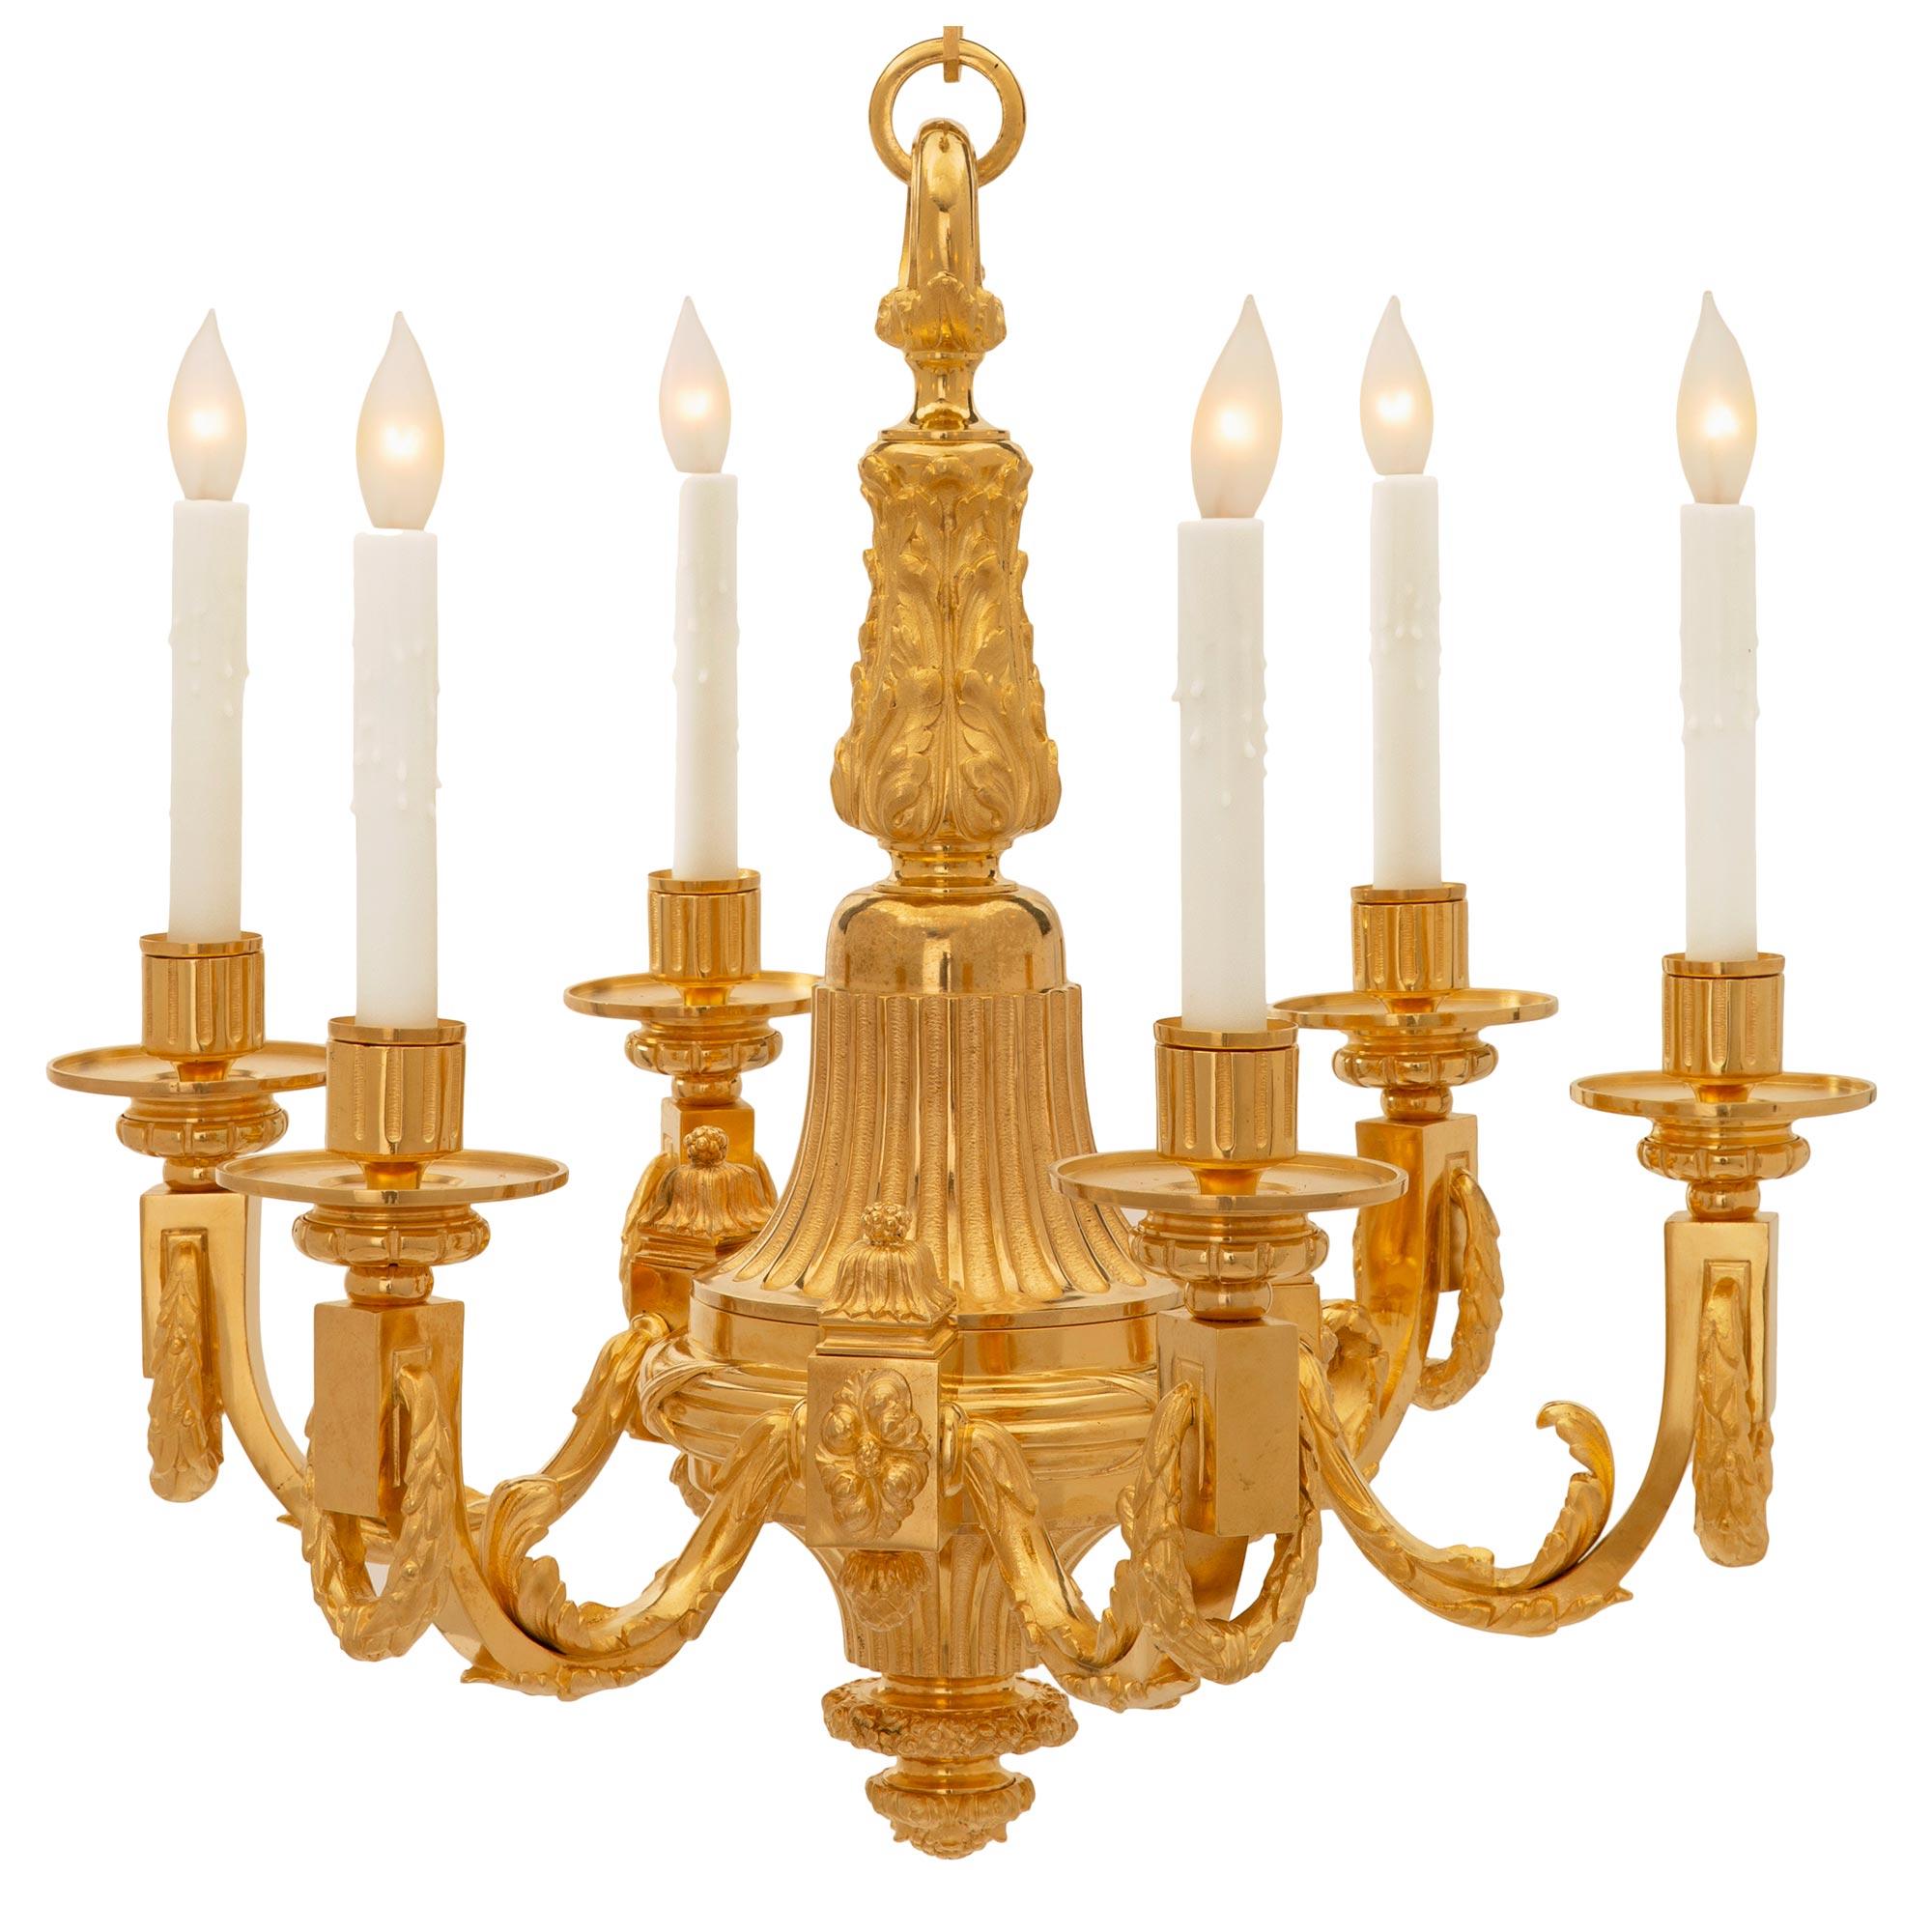 A beautiful and high quality French 19th century Louis XVI st. ormolu chandelier. The six arm chandelier is centered by a lovely bottom foliate finial below the elegantly tapered fluted body. The three pairs of arms branch out from richly chased